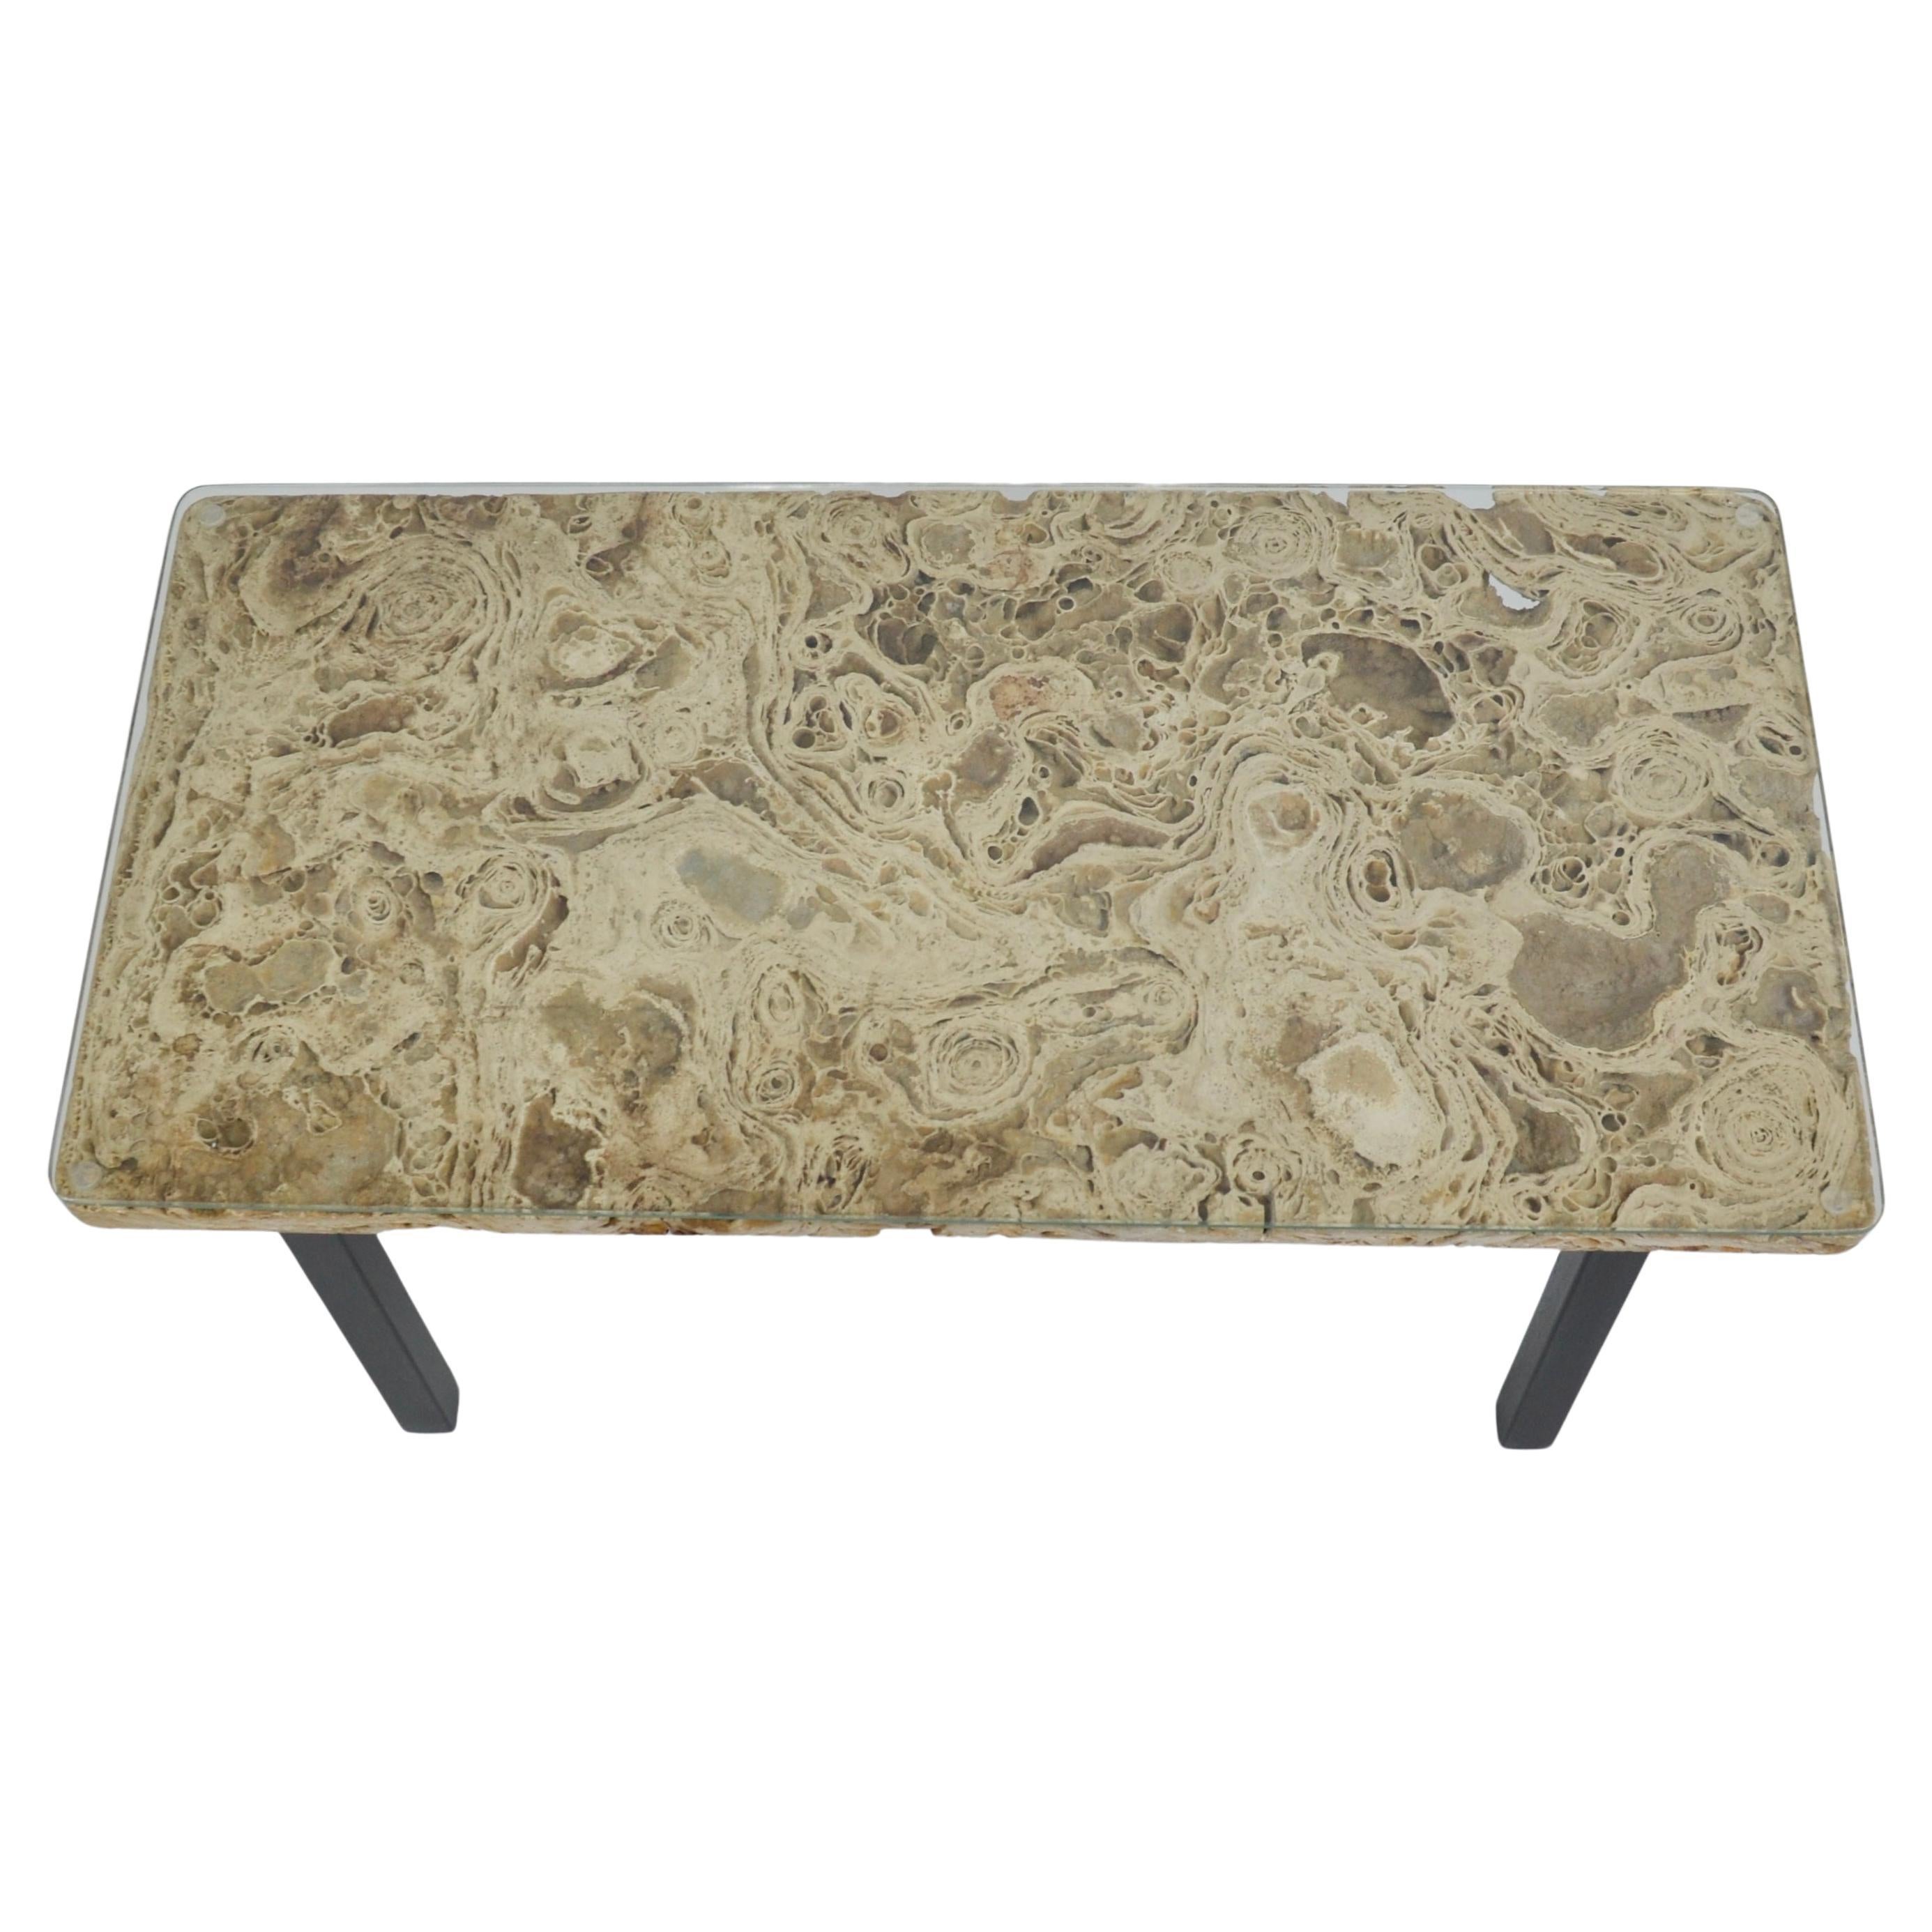 Vintage travertine and glass coffee table